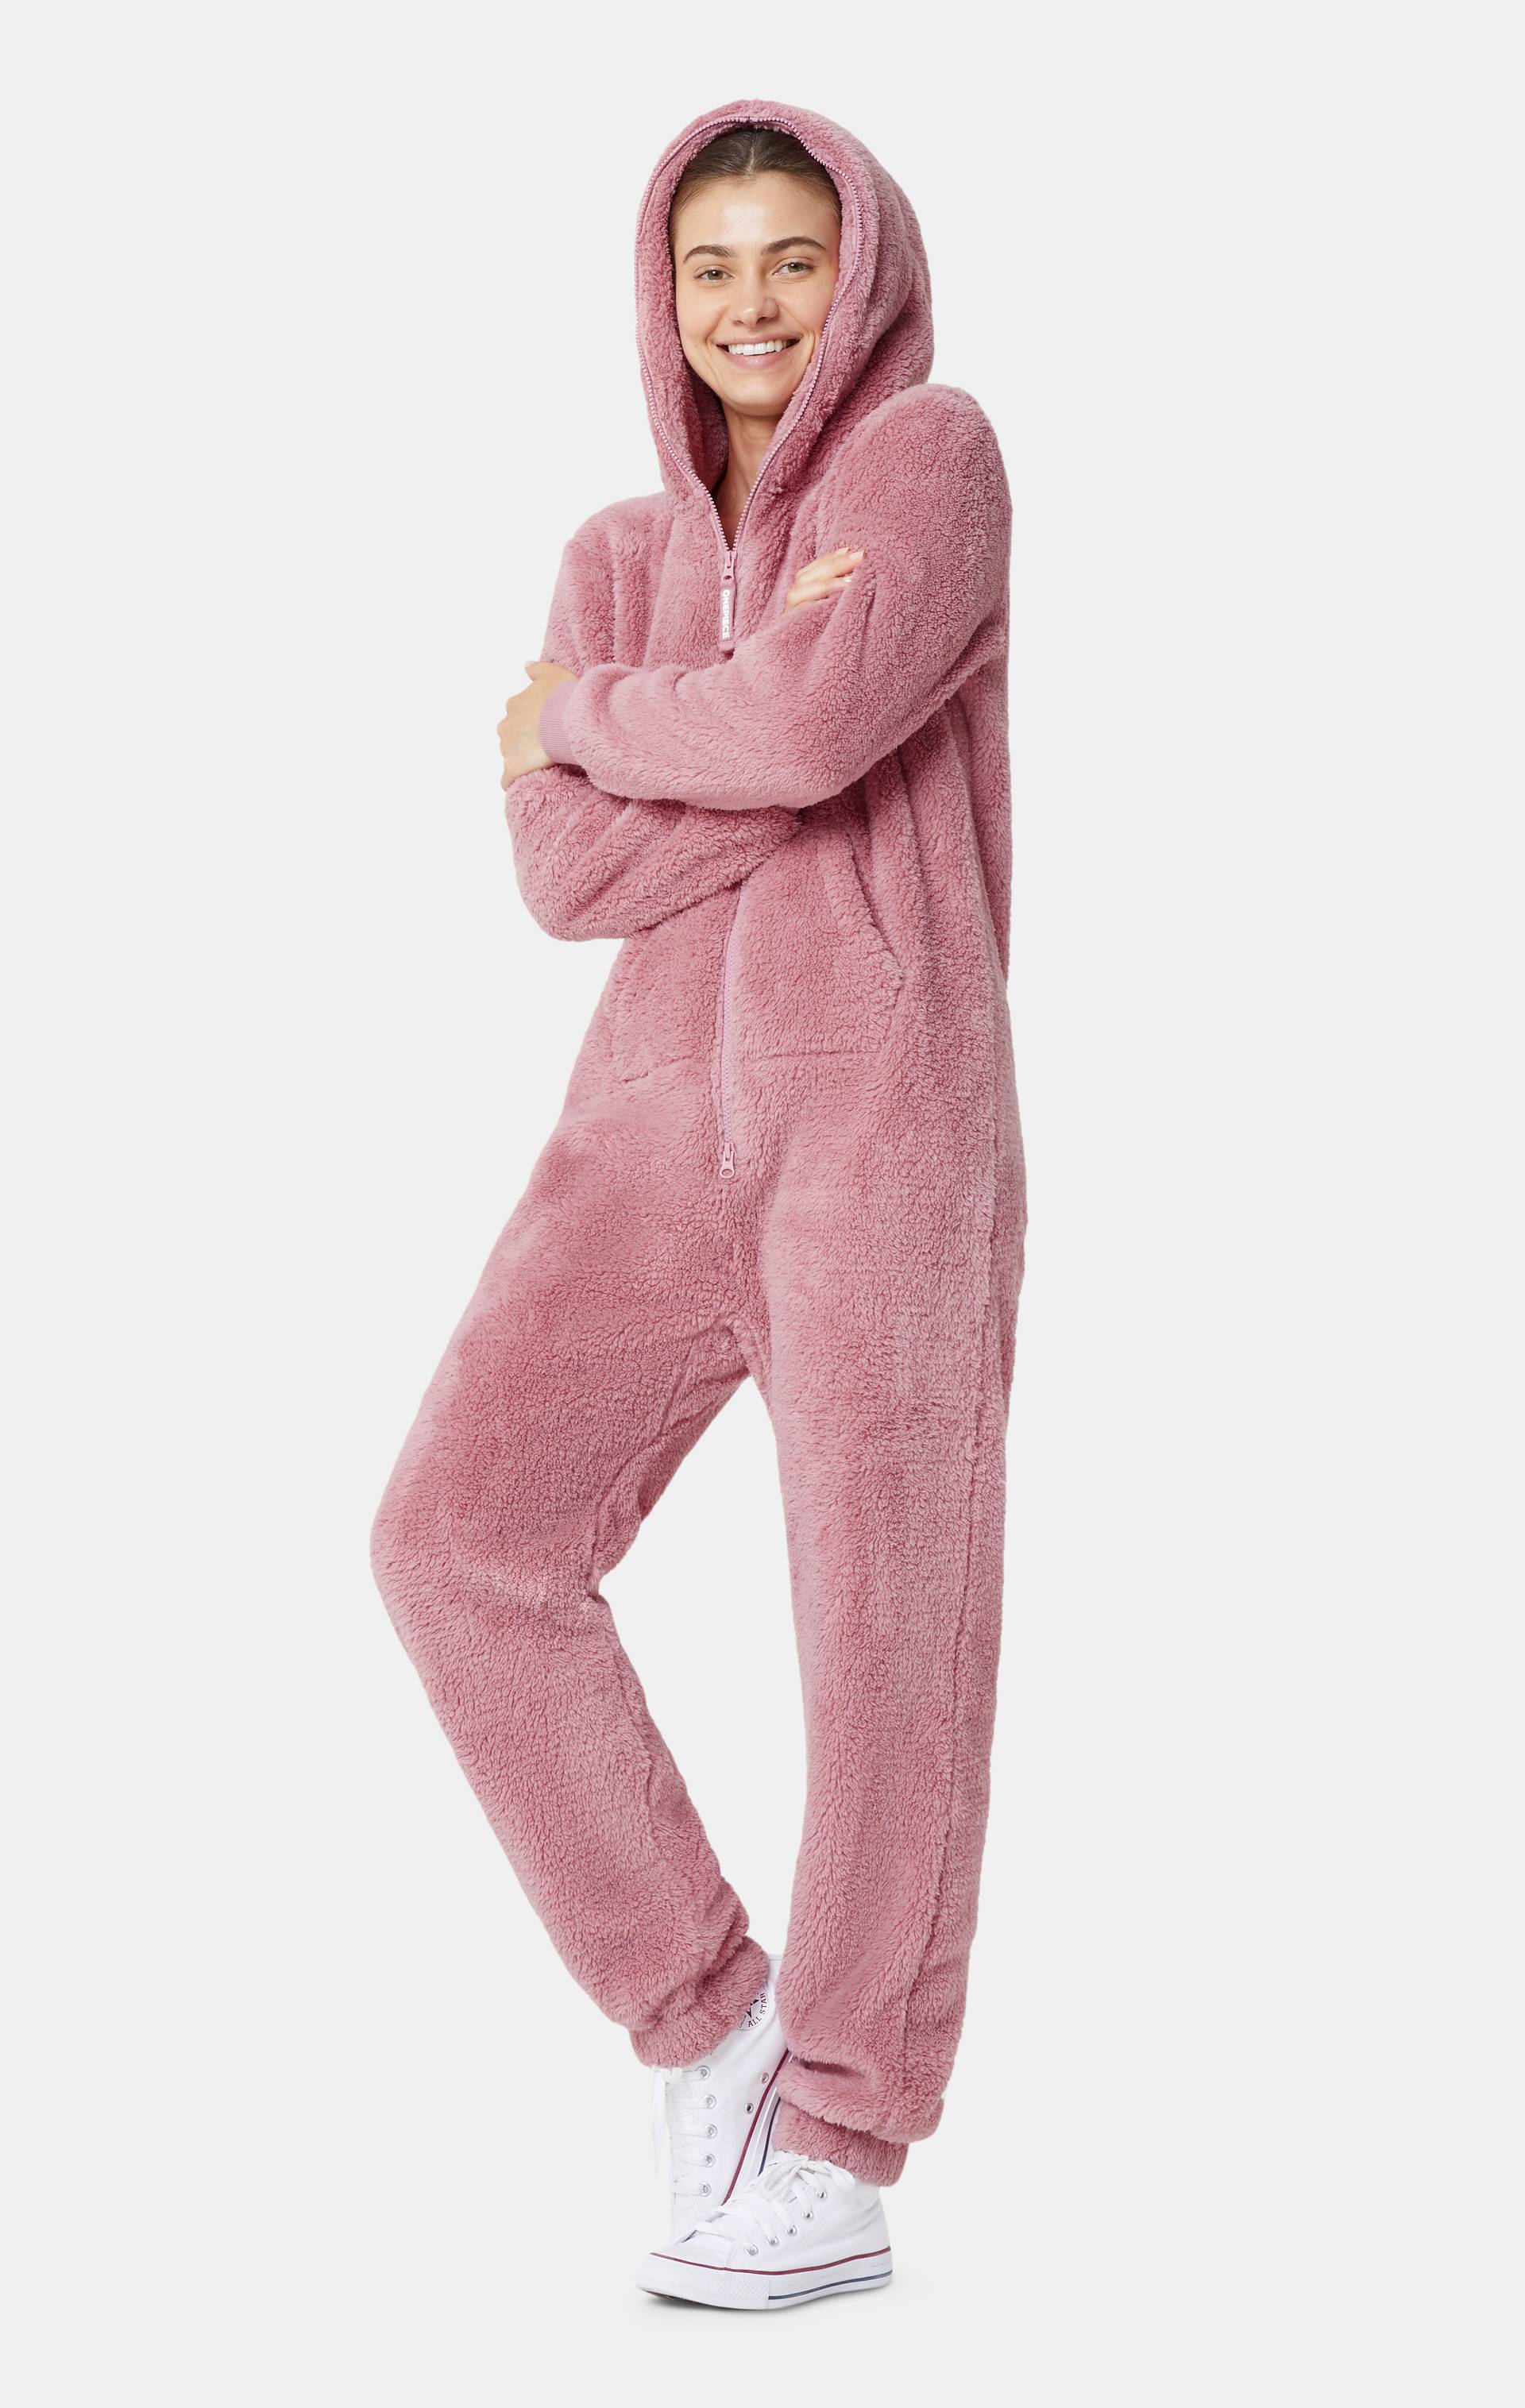 Onepiece The Puppy Jumpsuit Pink - 10